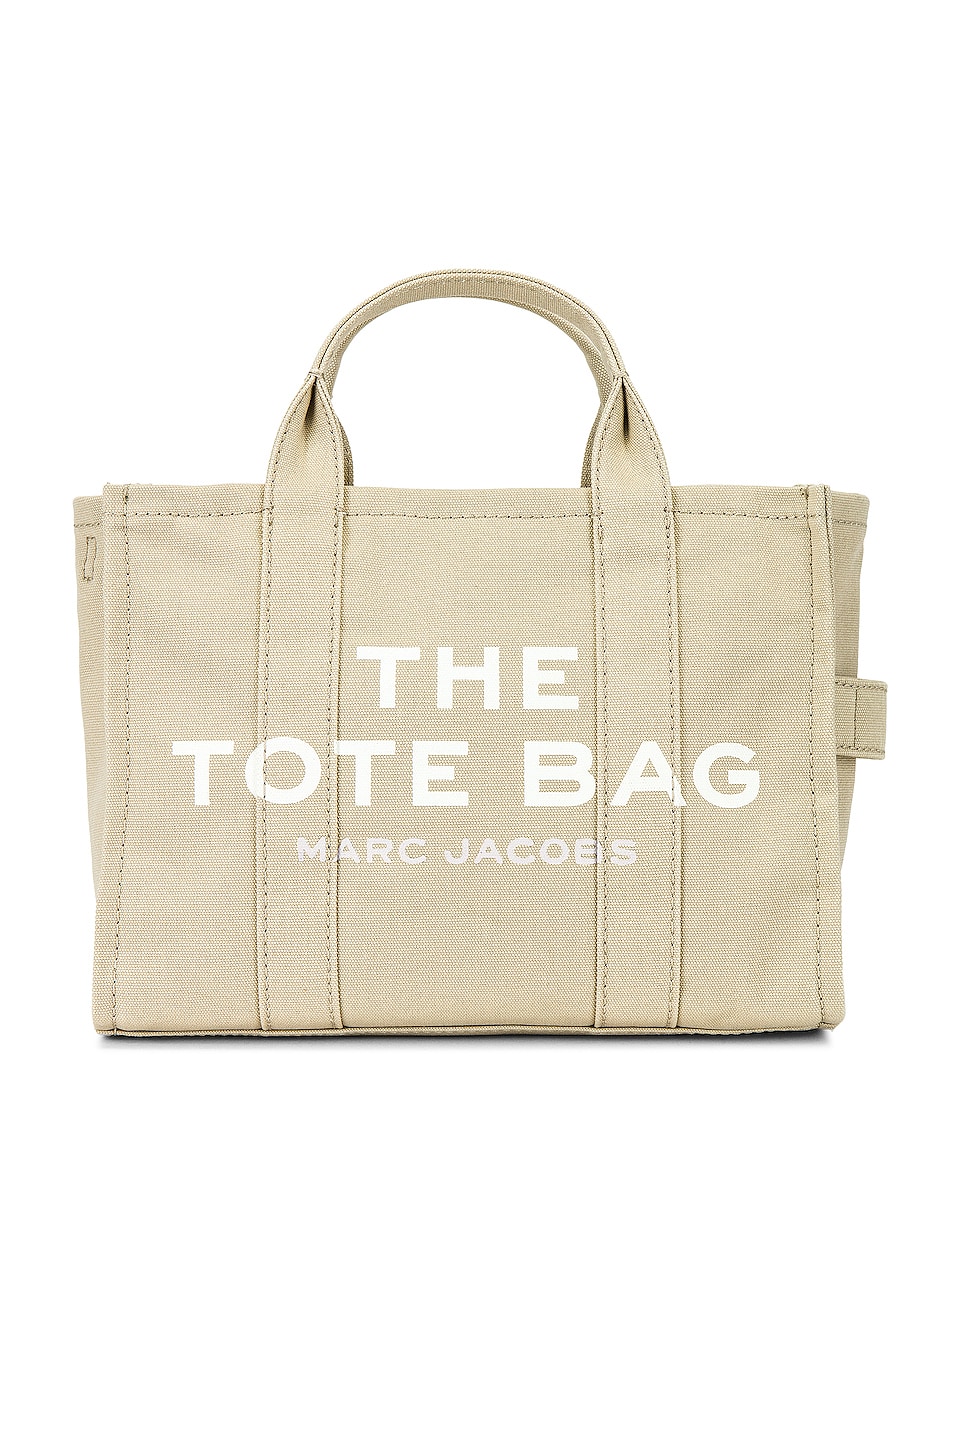 Marc Jacobs The Leather Large Tote Bag | Neiman Marcus